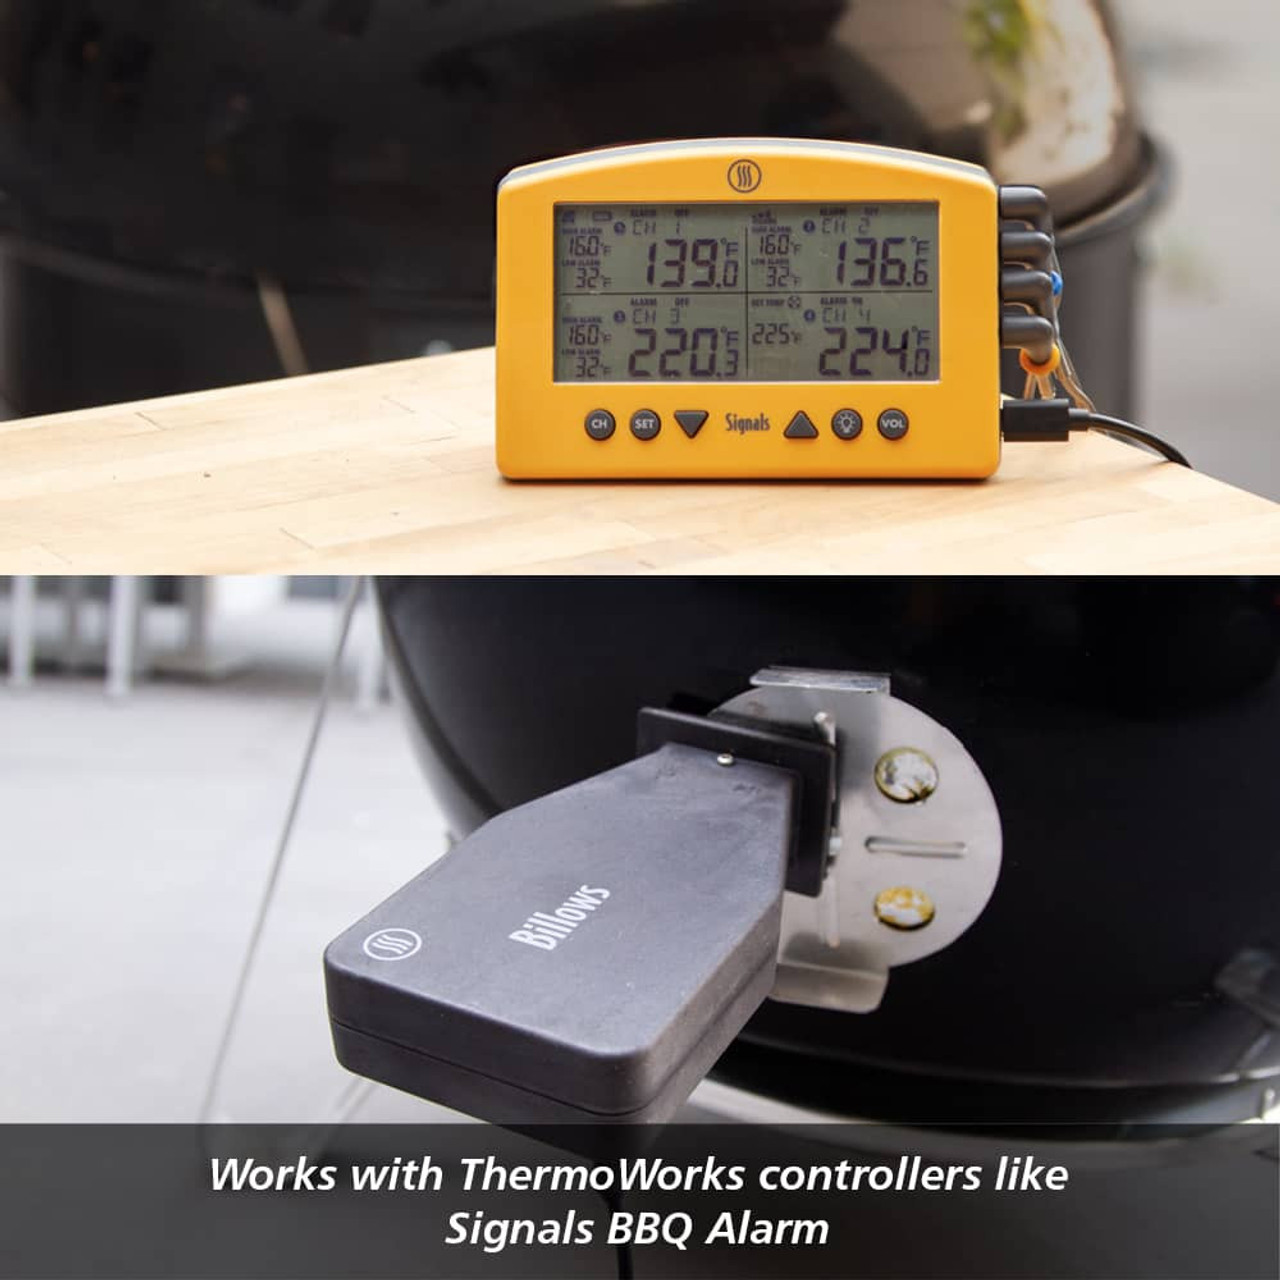 Nibble Me This: Product Review: Thermoworks Signals and Billows